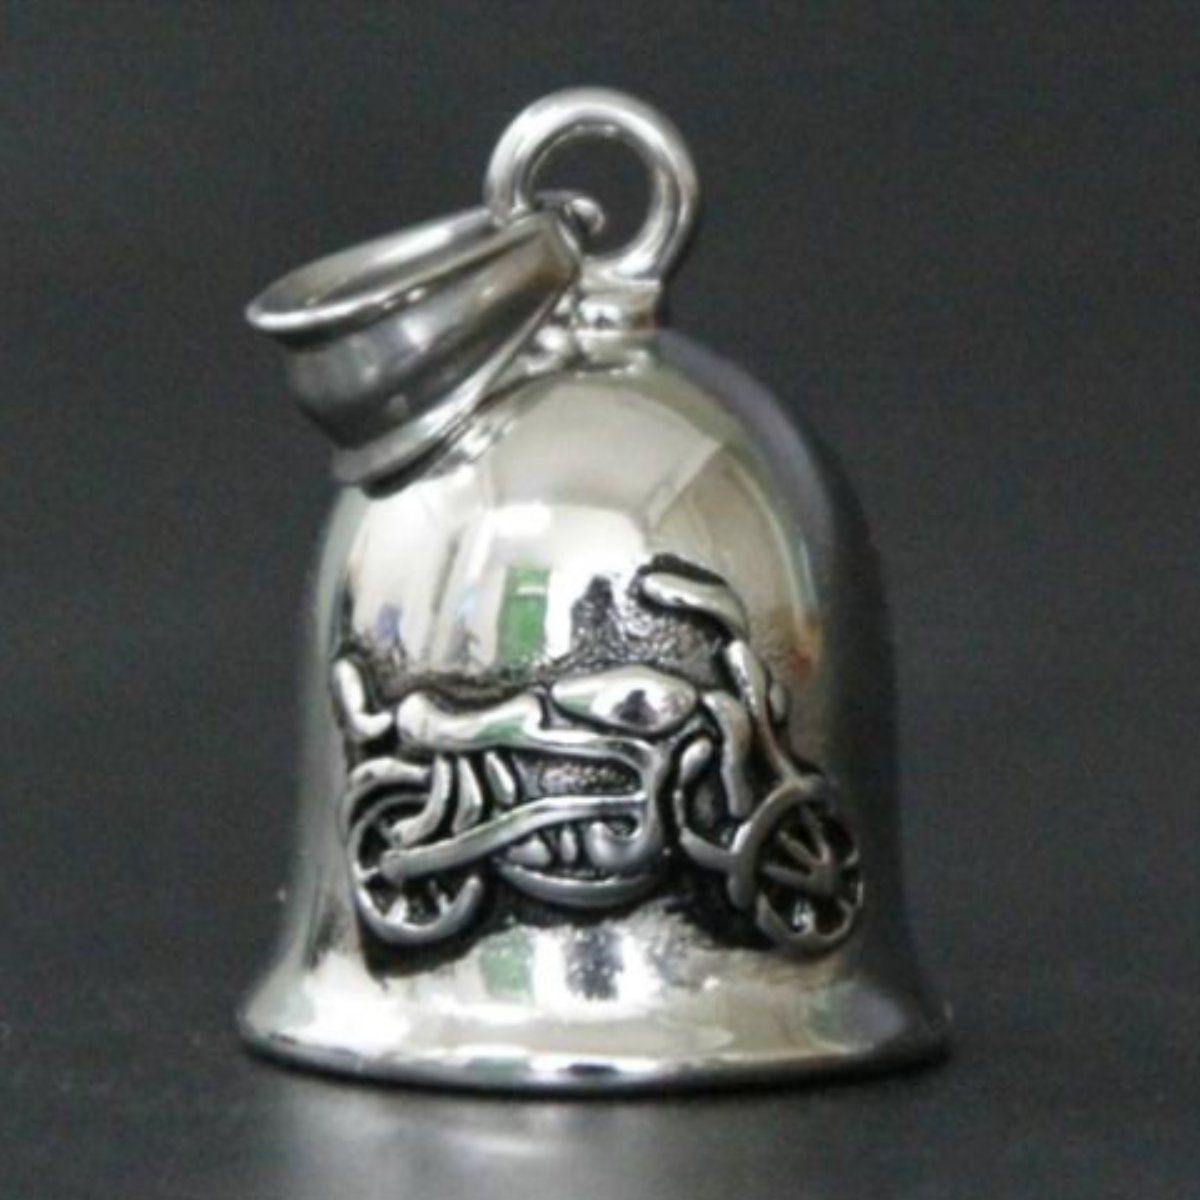 Small Motorcycle Guardian Bell - American Legend Rider